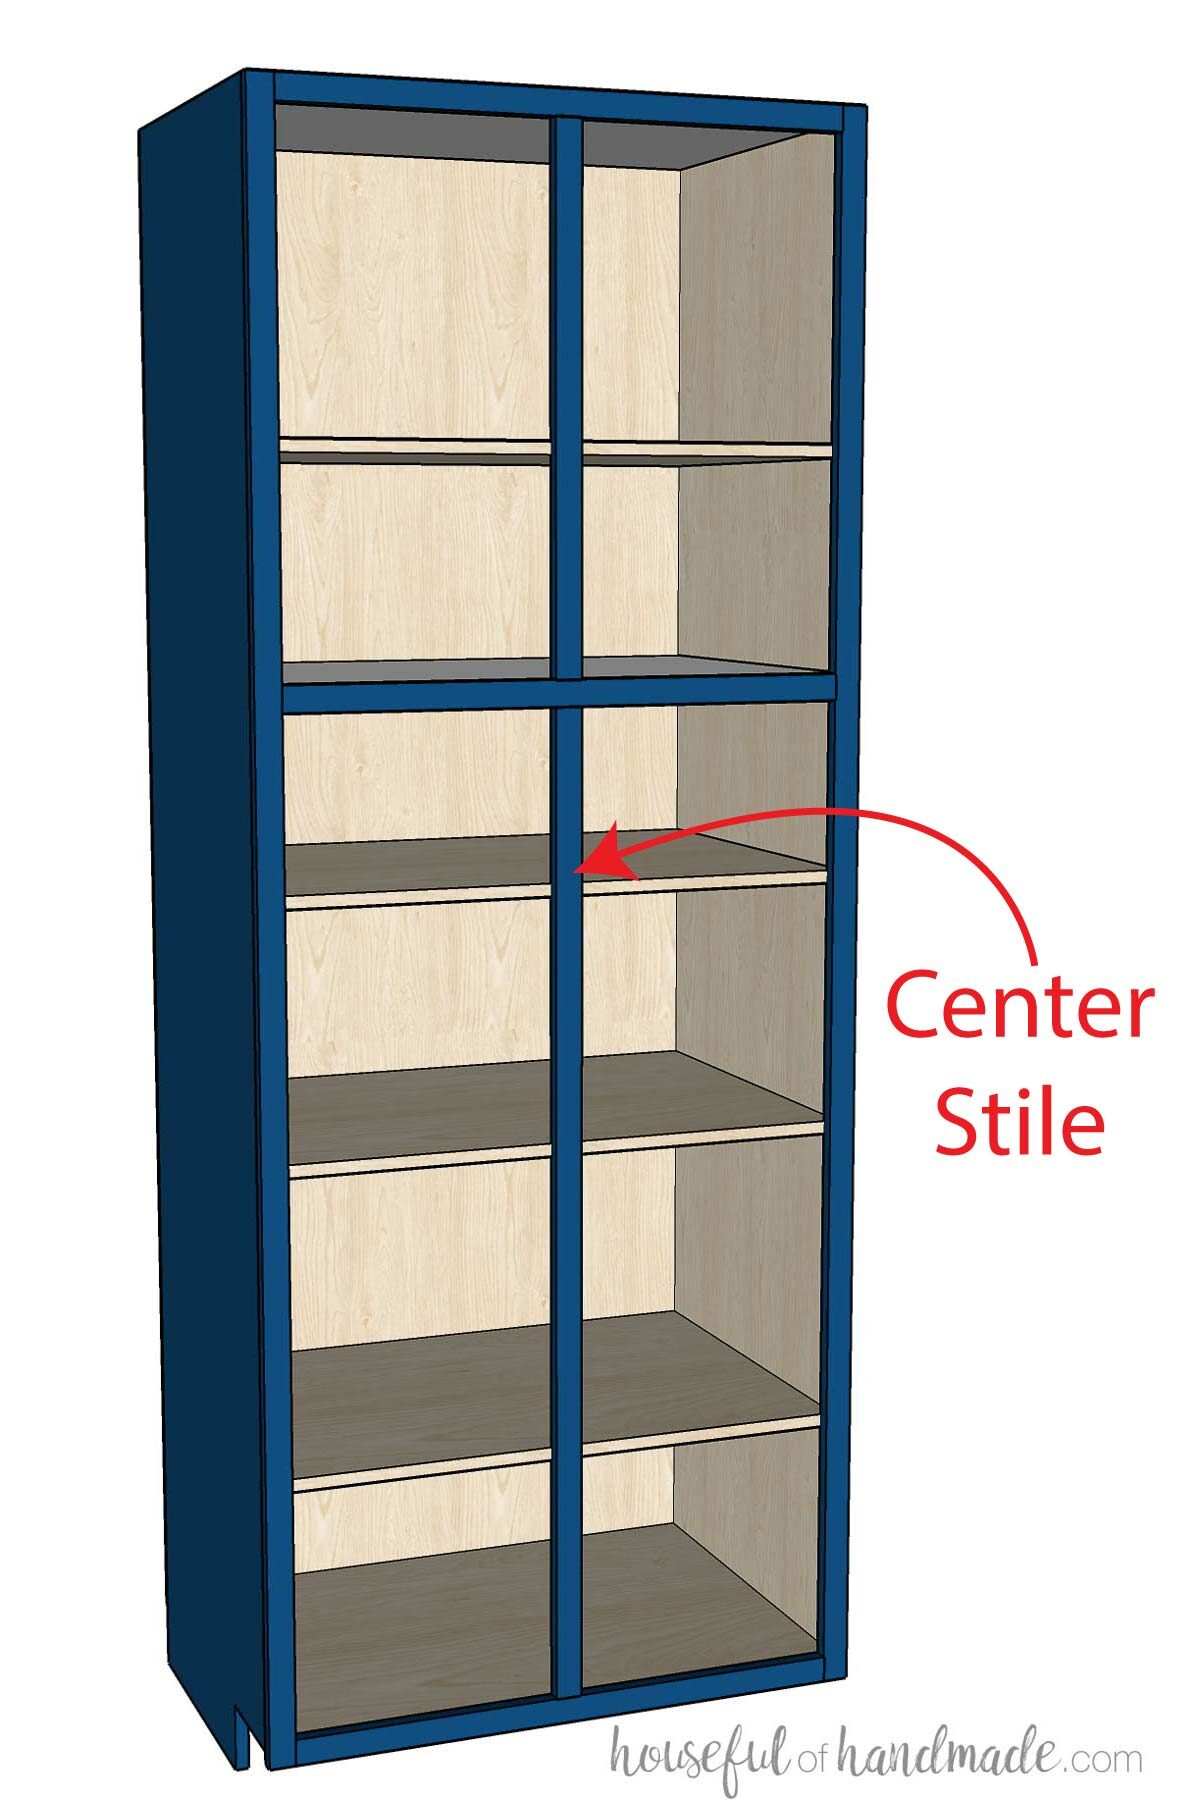 3D sketch of a pantry cabinet with a center stile in front of the shelves. 